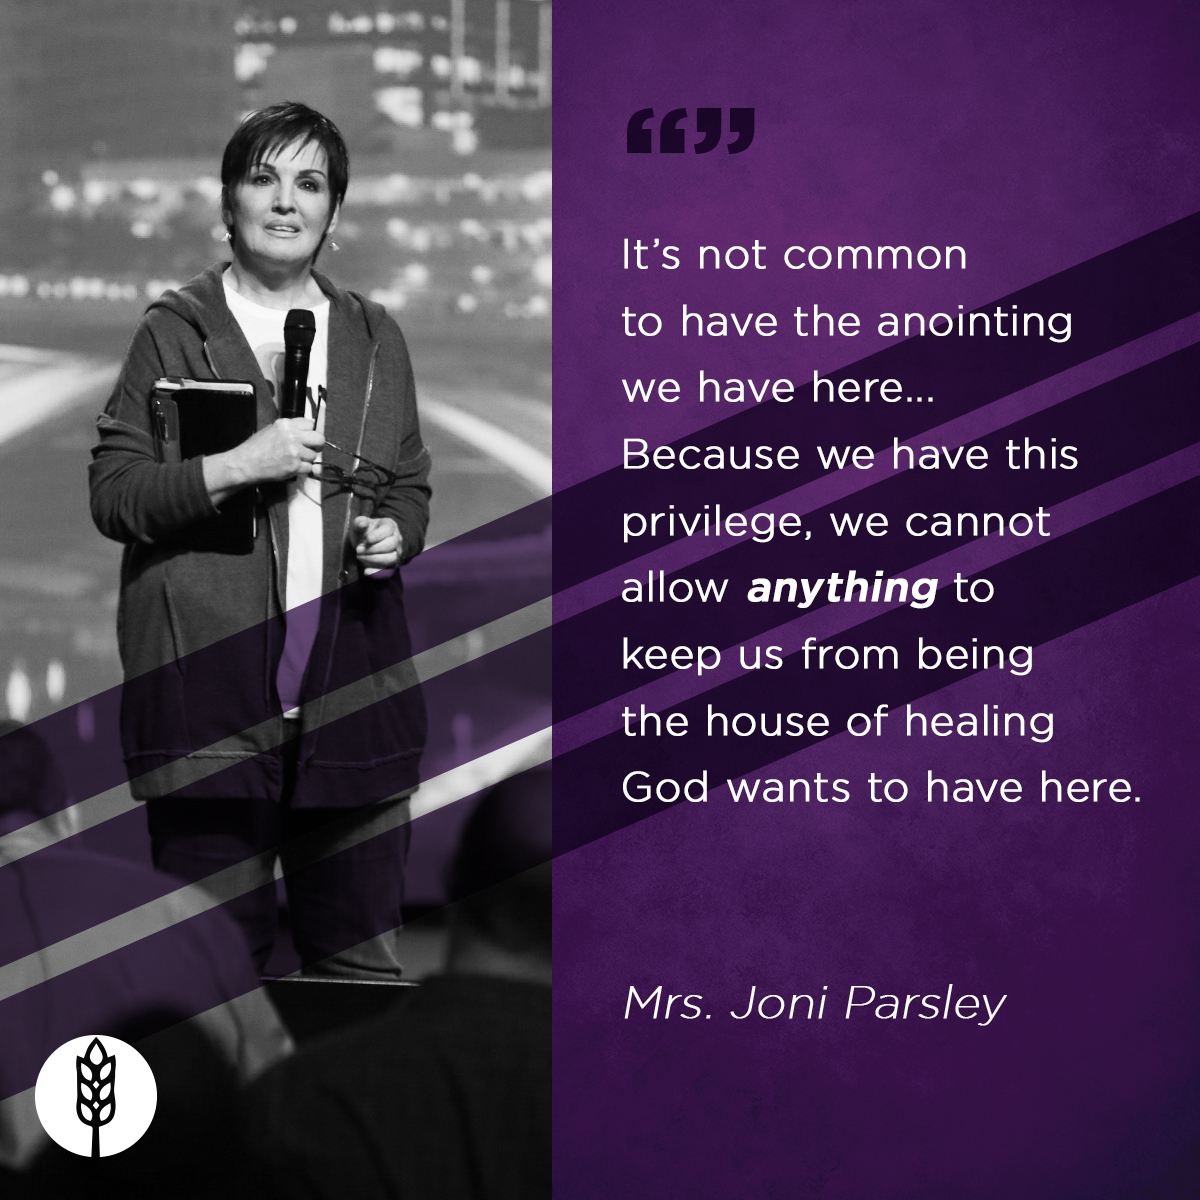 “It’s not common to have the anointing we have here… Because we have this privilege, we cannot allow anything to keep us from being the house of healing God wants to have here.